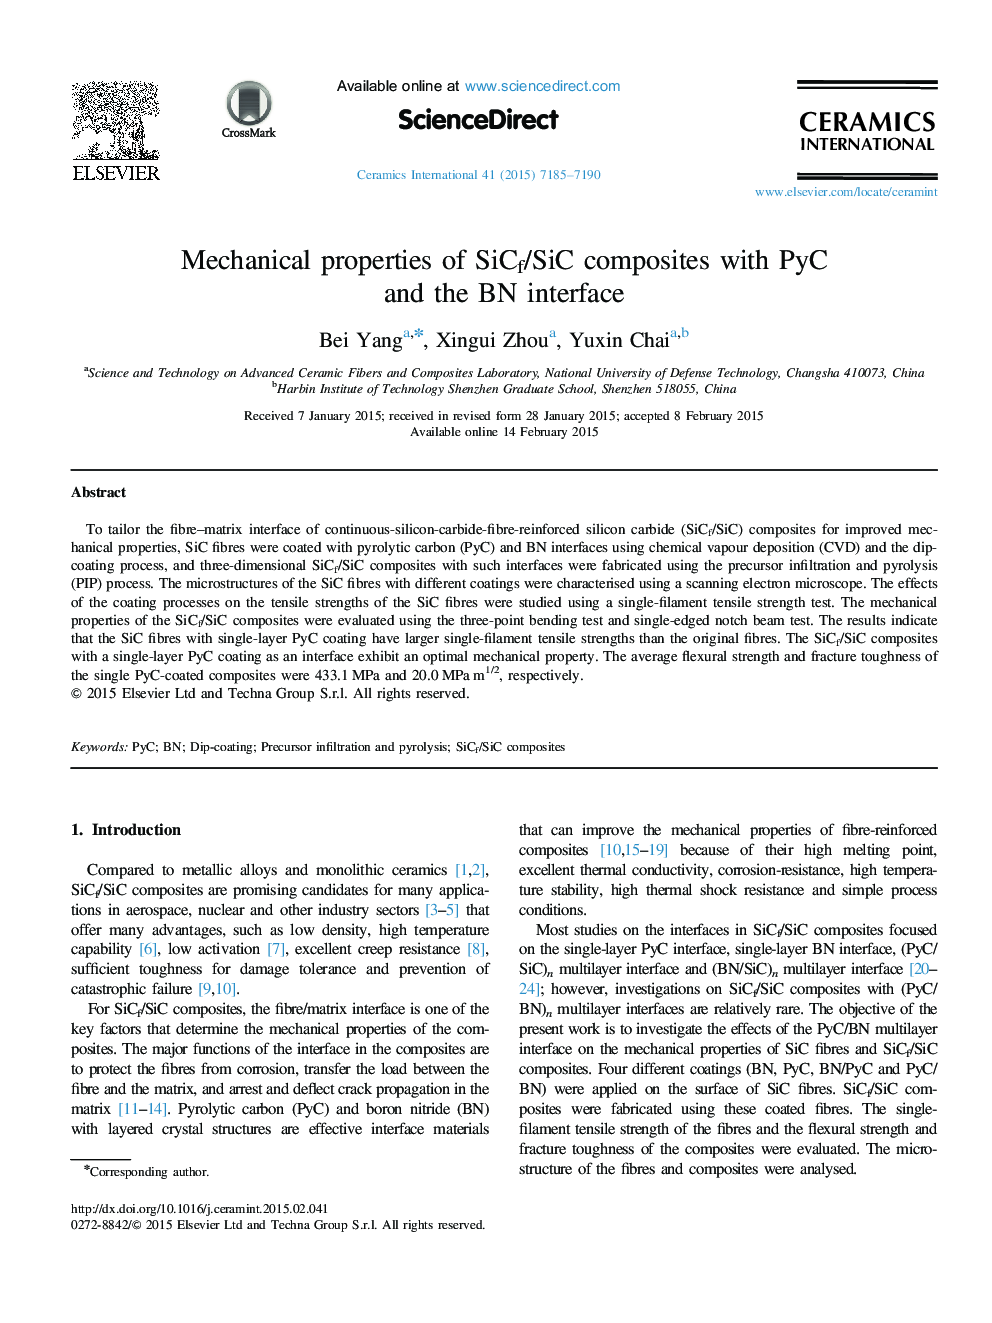 Mechanical properties of SiCf/SiC composites with PyC and the BN interface